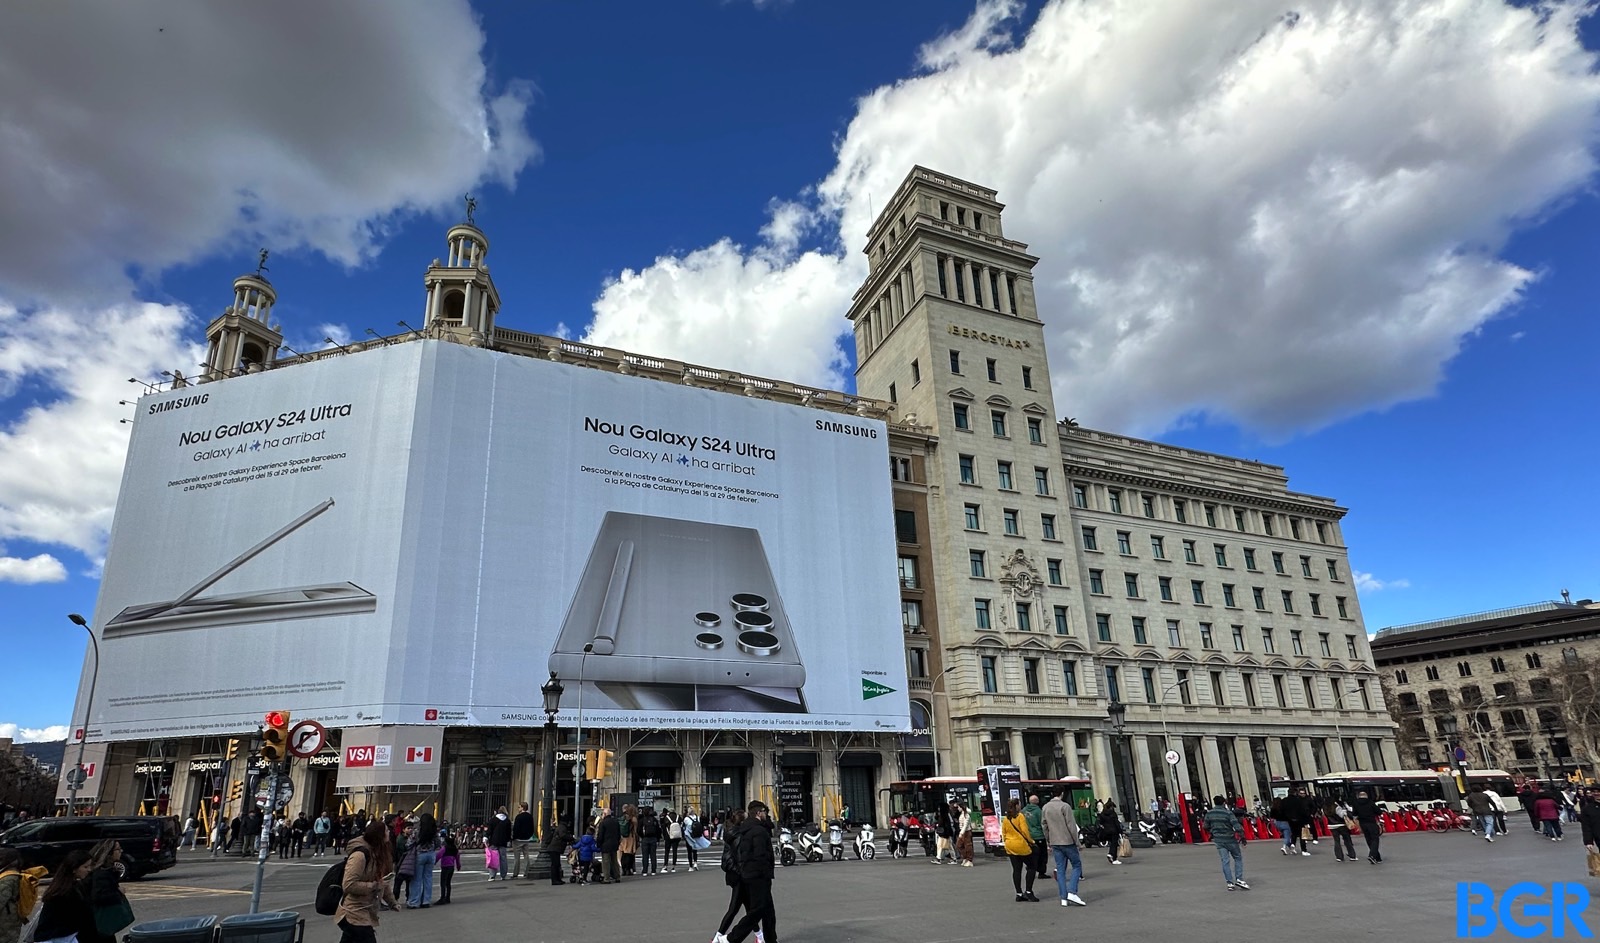 Samsung's big Galaxy S24 poster took half of a building in Barcelona, Spain. Apple's flagship retail store is on the ground floor of the other half.